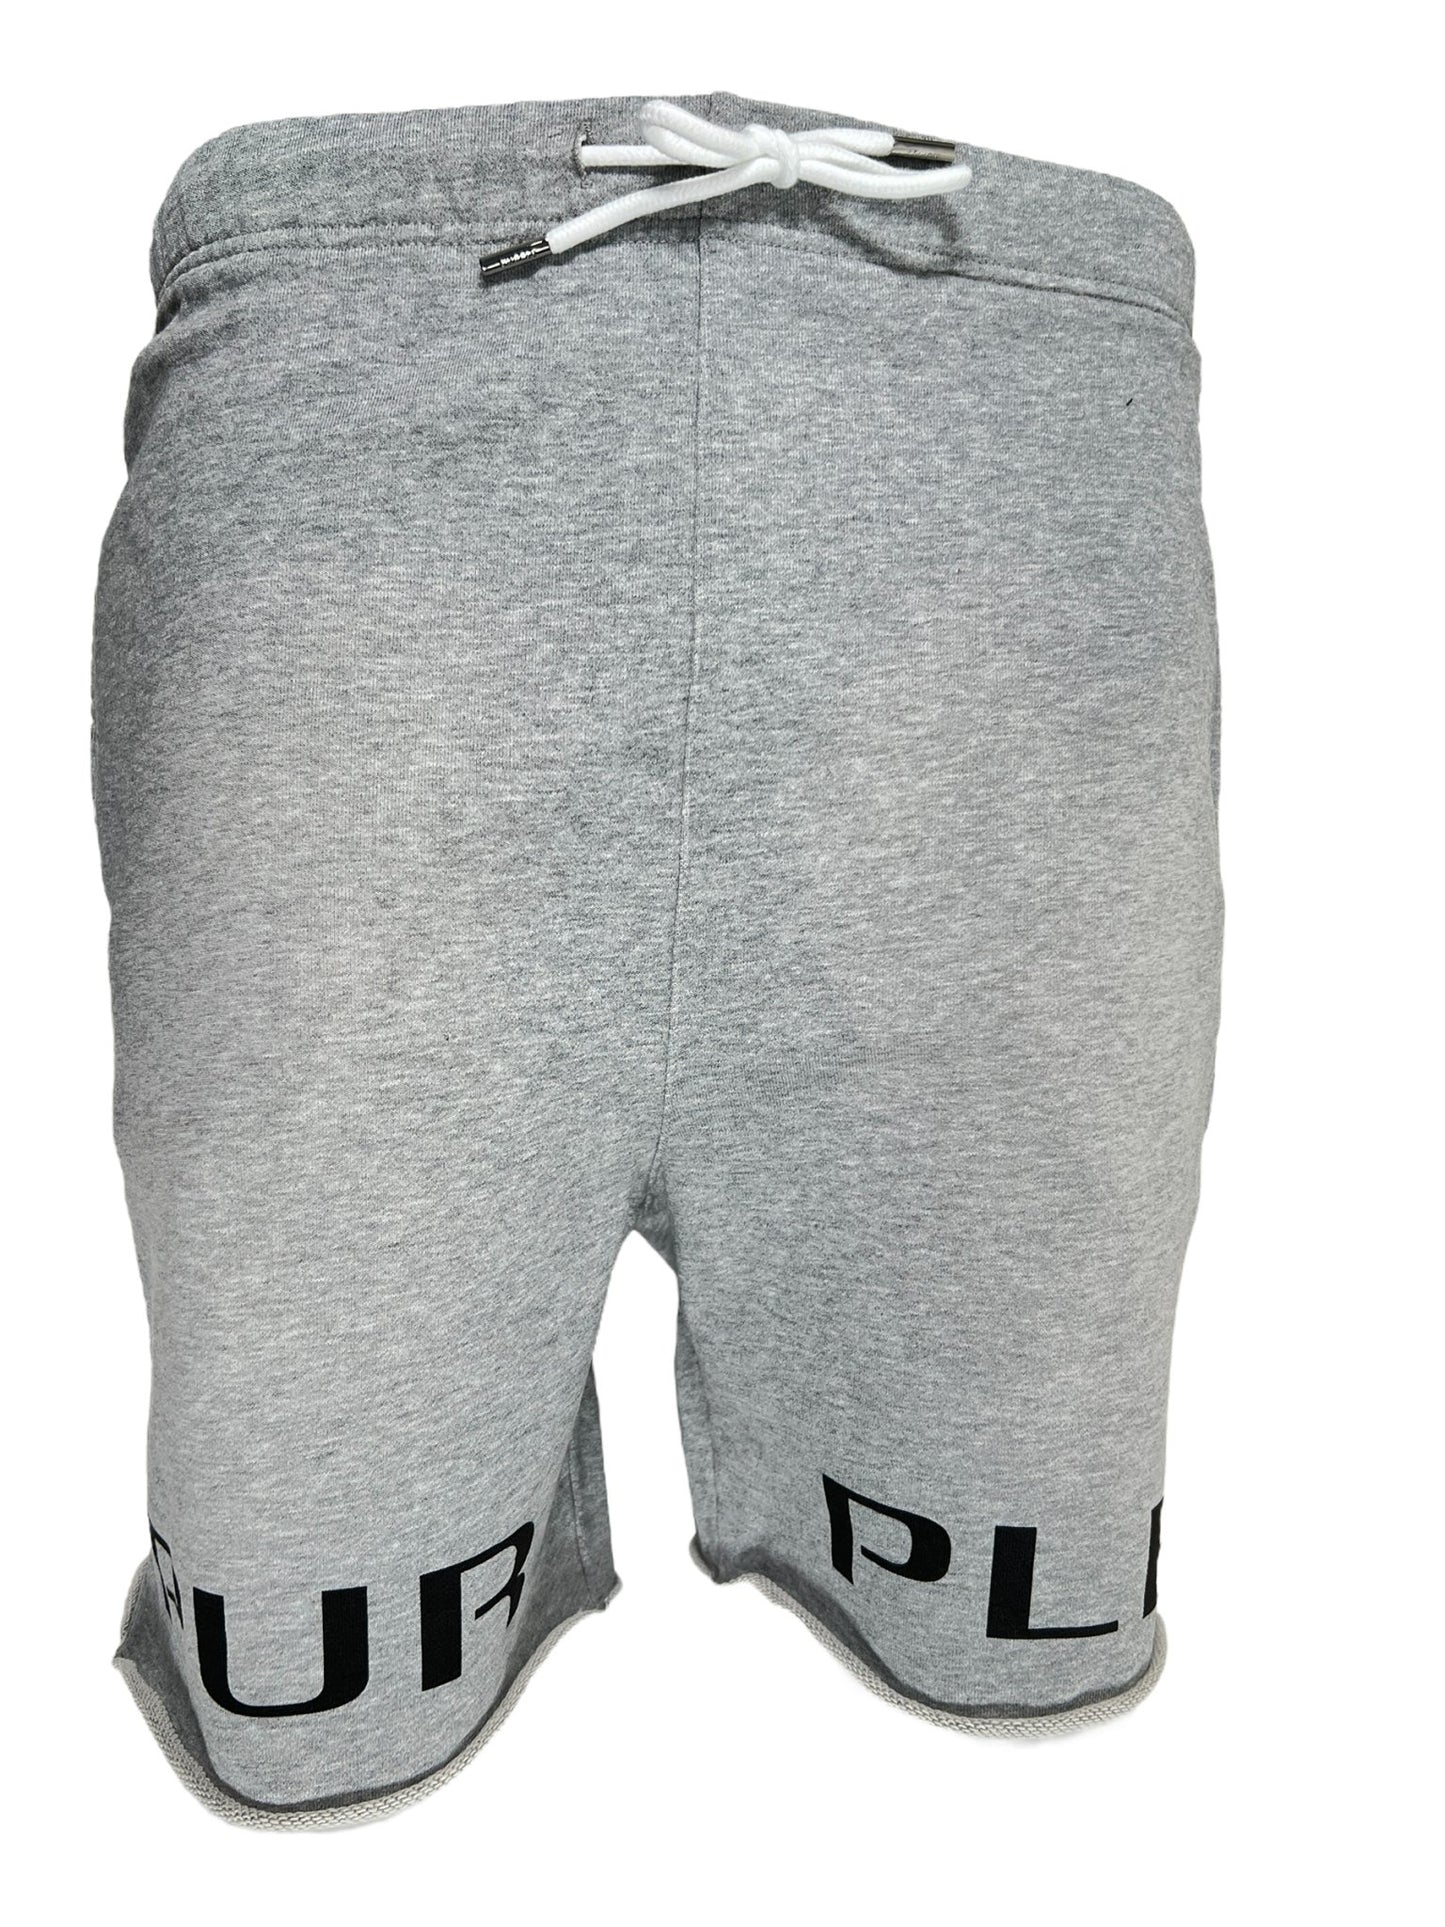 Gray sweat shorts with a drawstring waist and PURPLE BRAND elastic band at the hem, displayed on a white background.(Product Name: PURPLE BRAND P446-FWHG FRENCH TERRY SWEATSHORTS HEATHER)
Brand Name: PURPLE BRAND